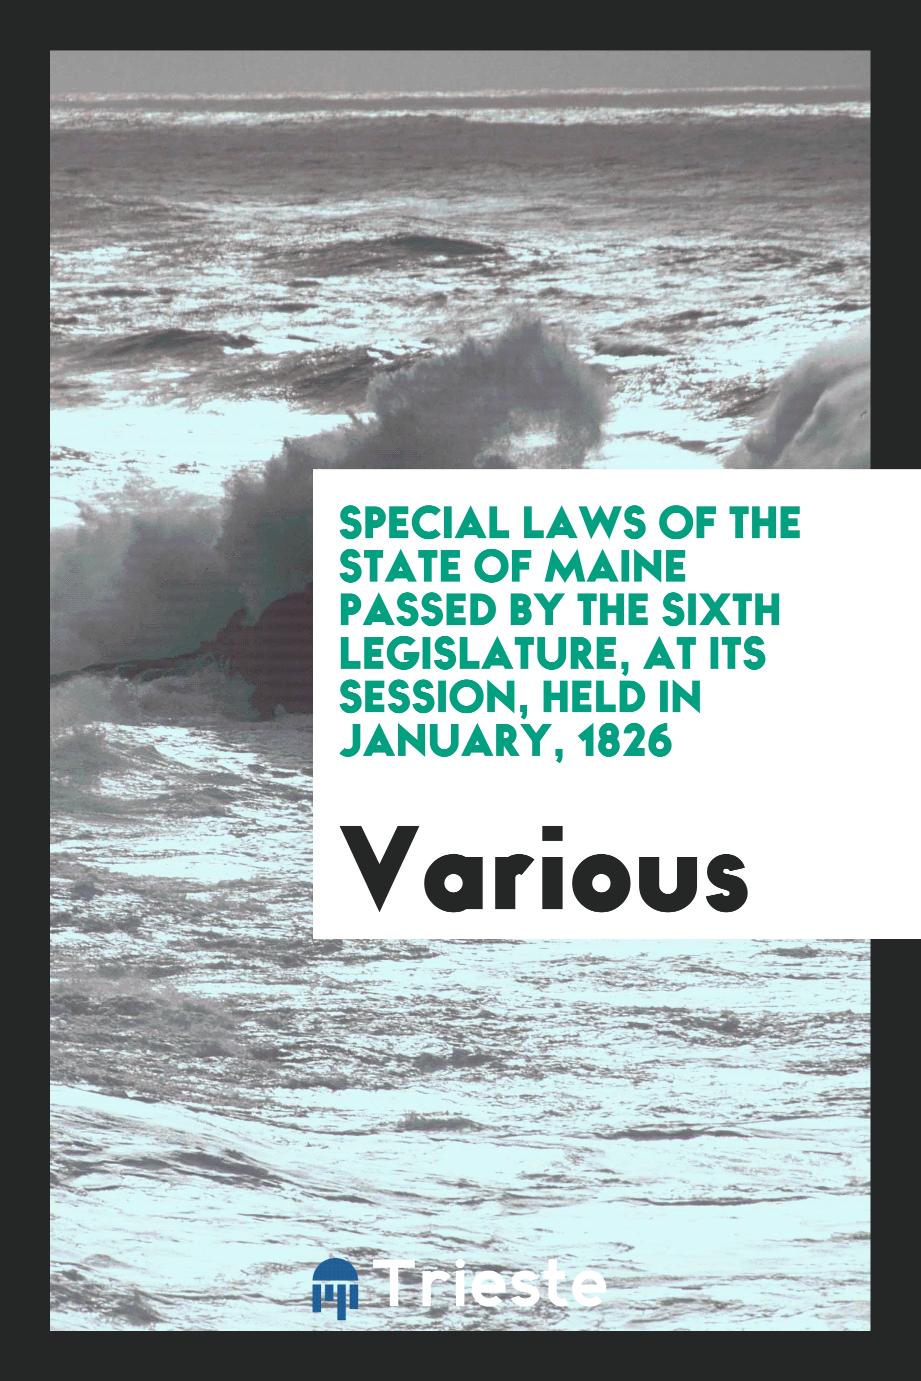 Special Laws of the State of Maine Passed by the Sixth Legislature, at Its Session, Held in January, 1826